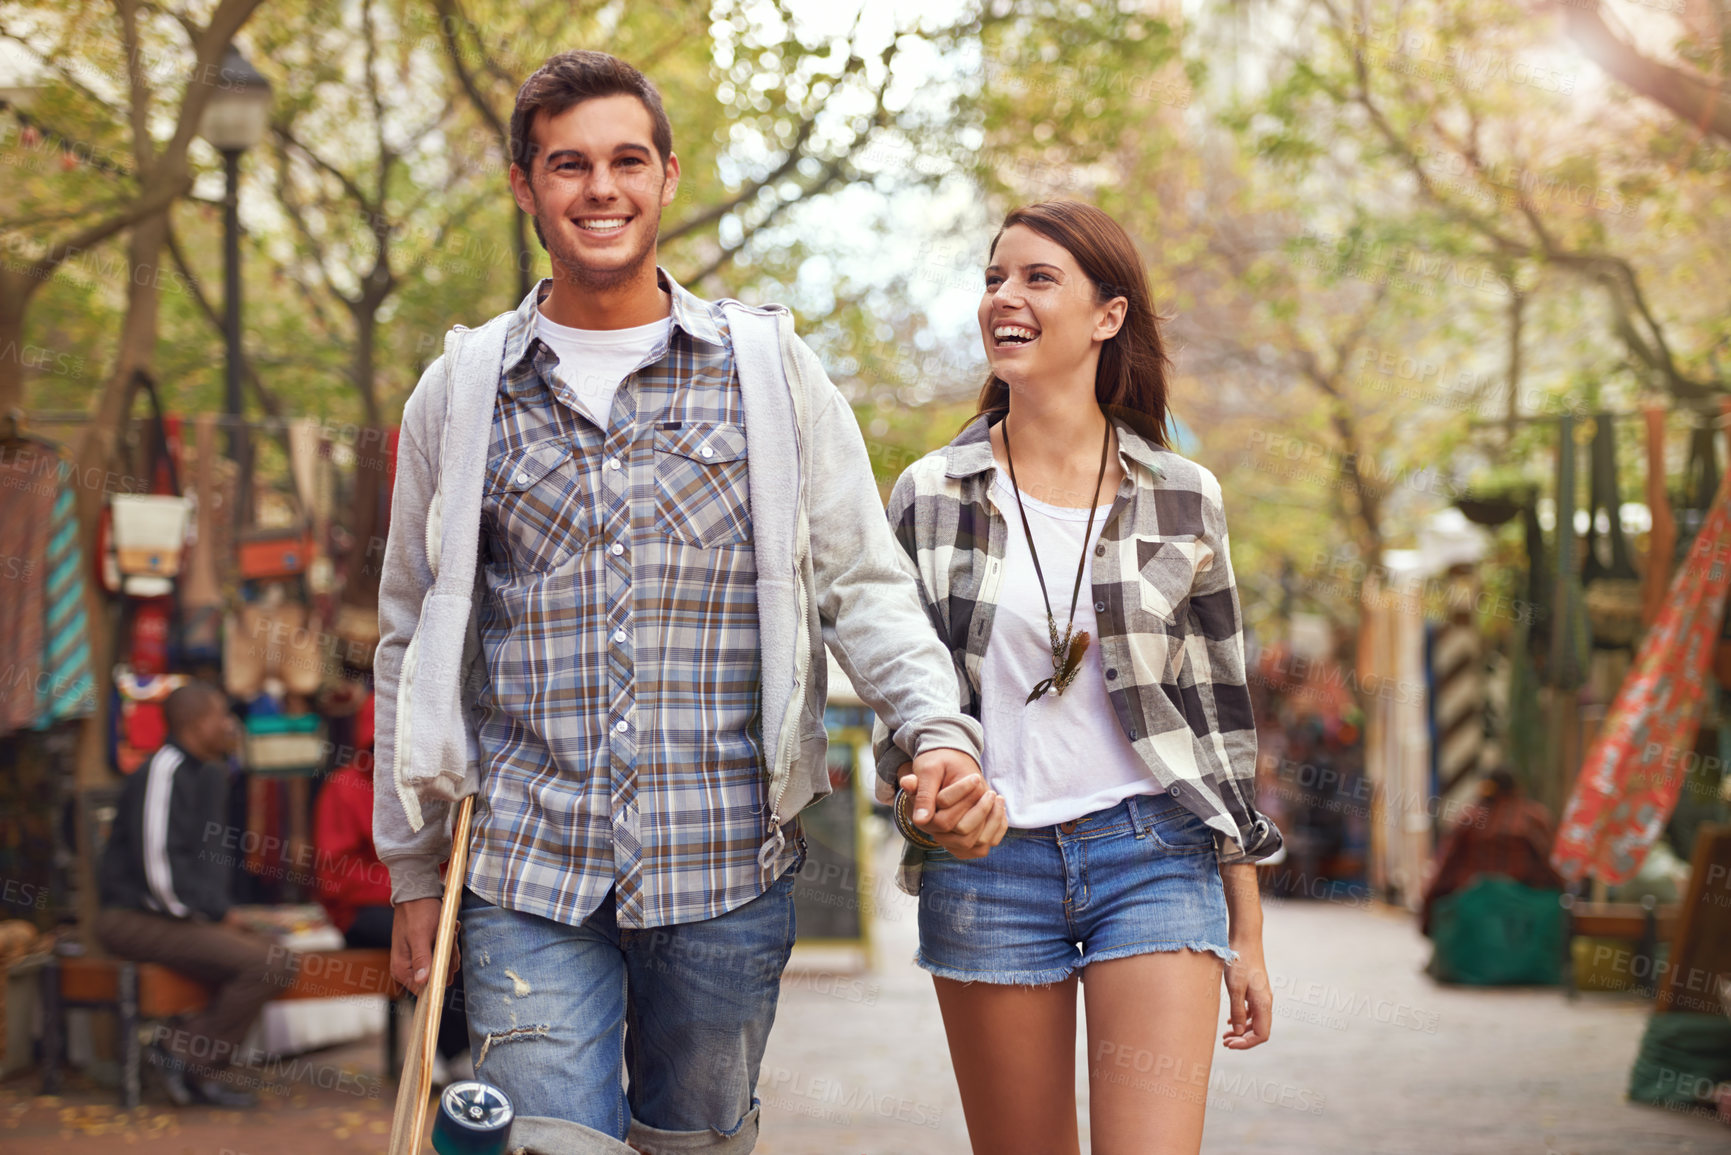 Buy stock photo Smile, walking and couple holding hands on city journey, morning trip or weekend tour of urban Spain for outdoor adventure. Love, skateboard and young people bonding together on relax commute